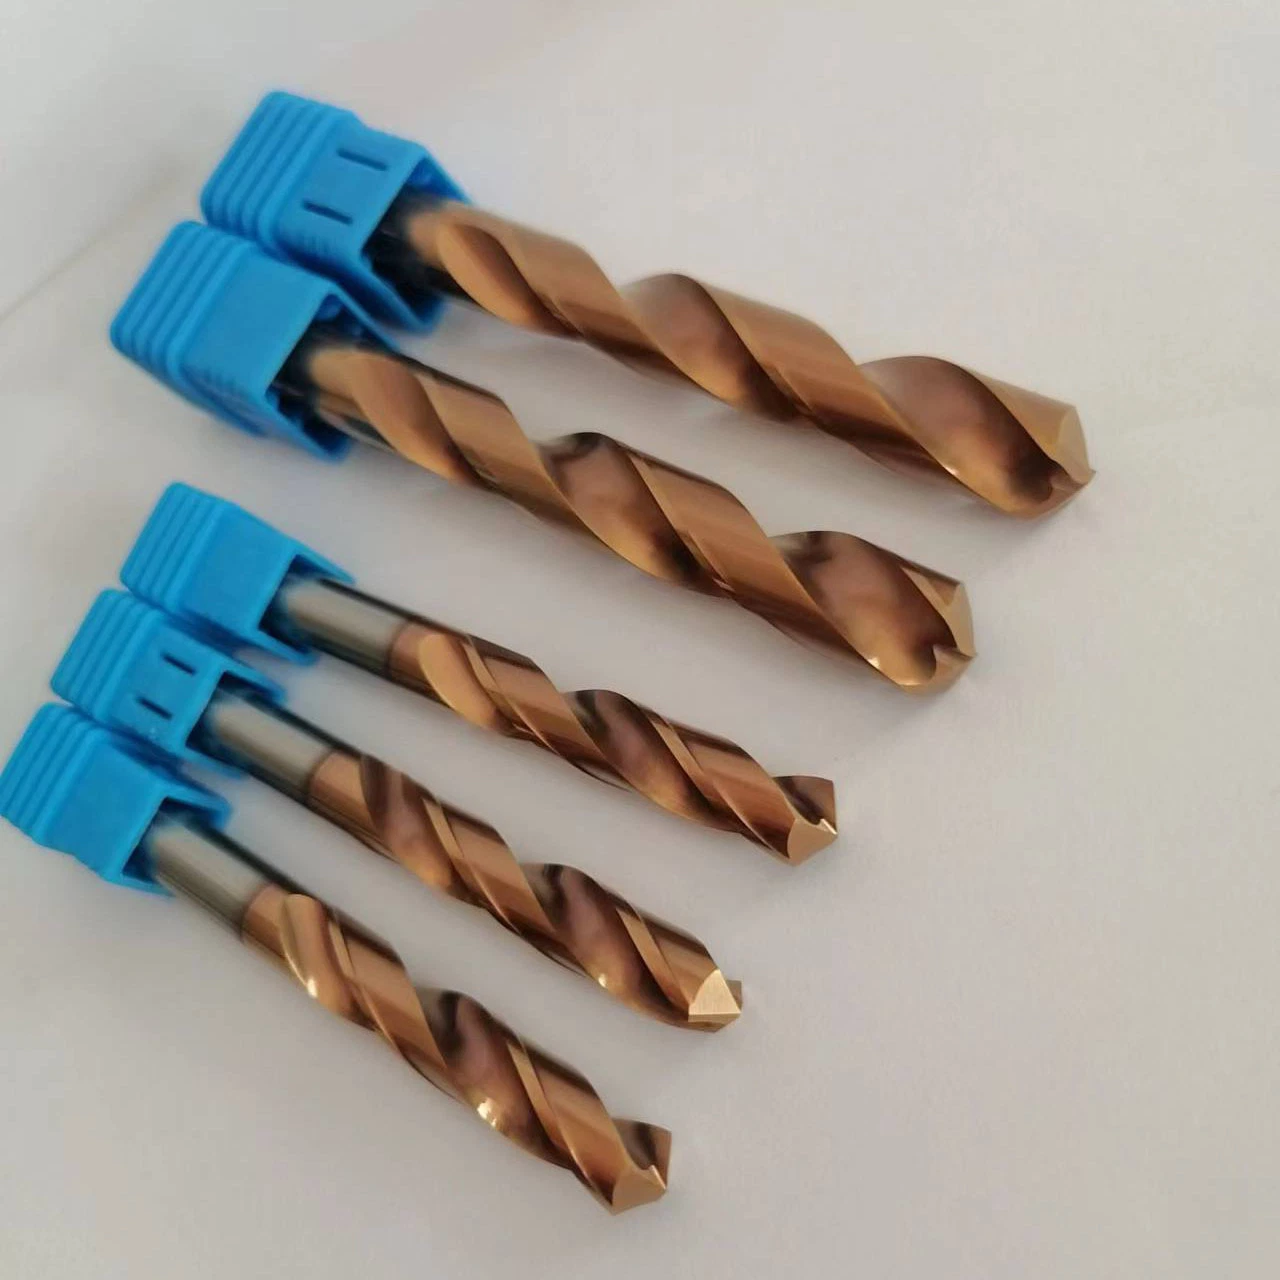 CNC Cutting Tools Preda Ferramentas Coated HRC60 Tungsten Carbide Drills for Stainless Steel